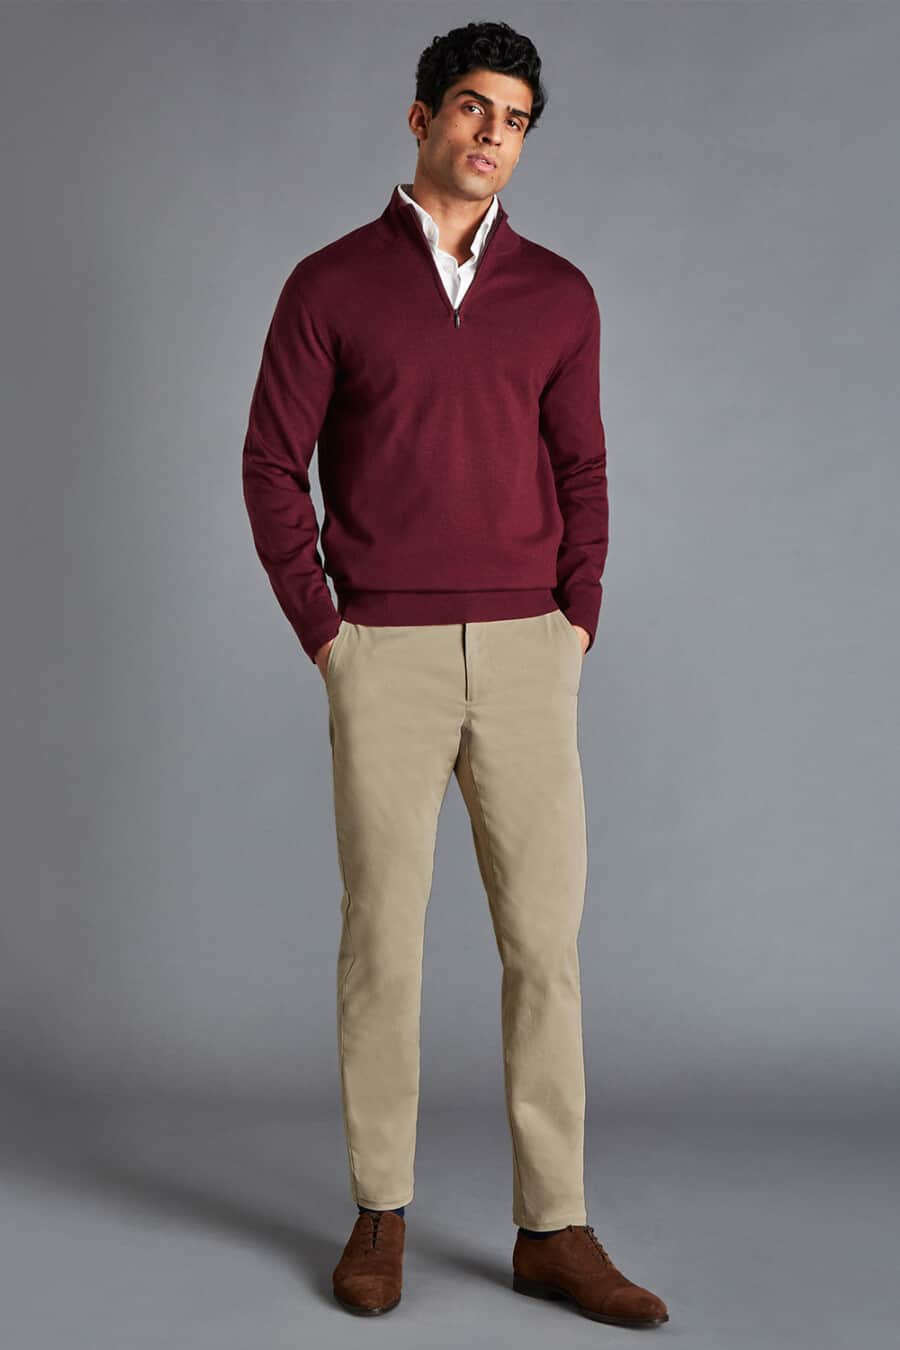 Men's khaki chinos, white shirt, burgundy half zip sweater and brown suede shoes outfit